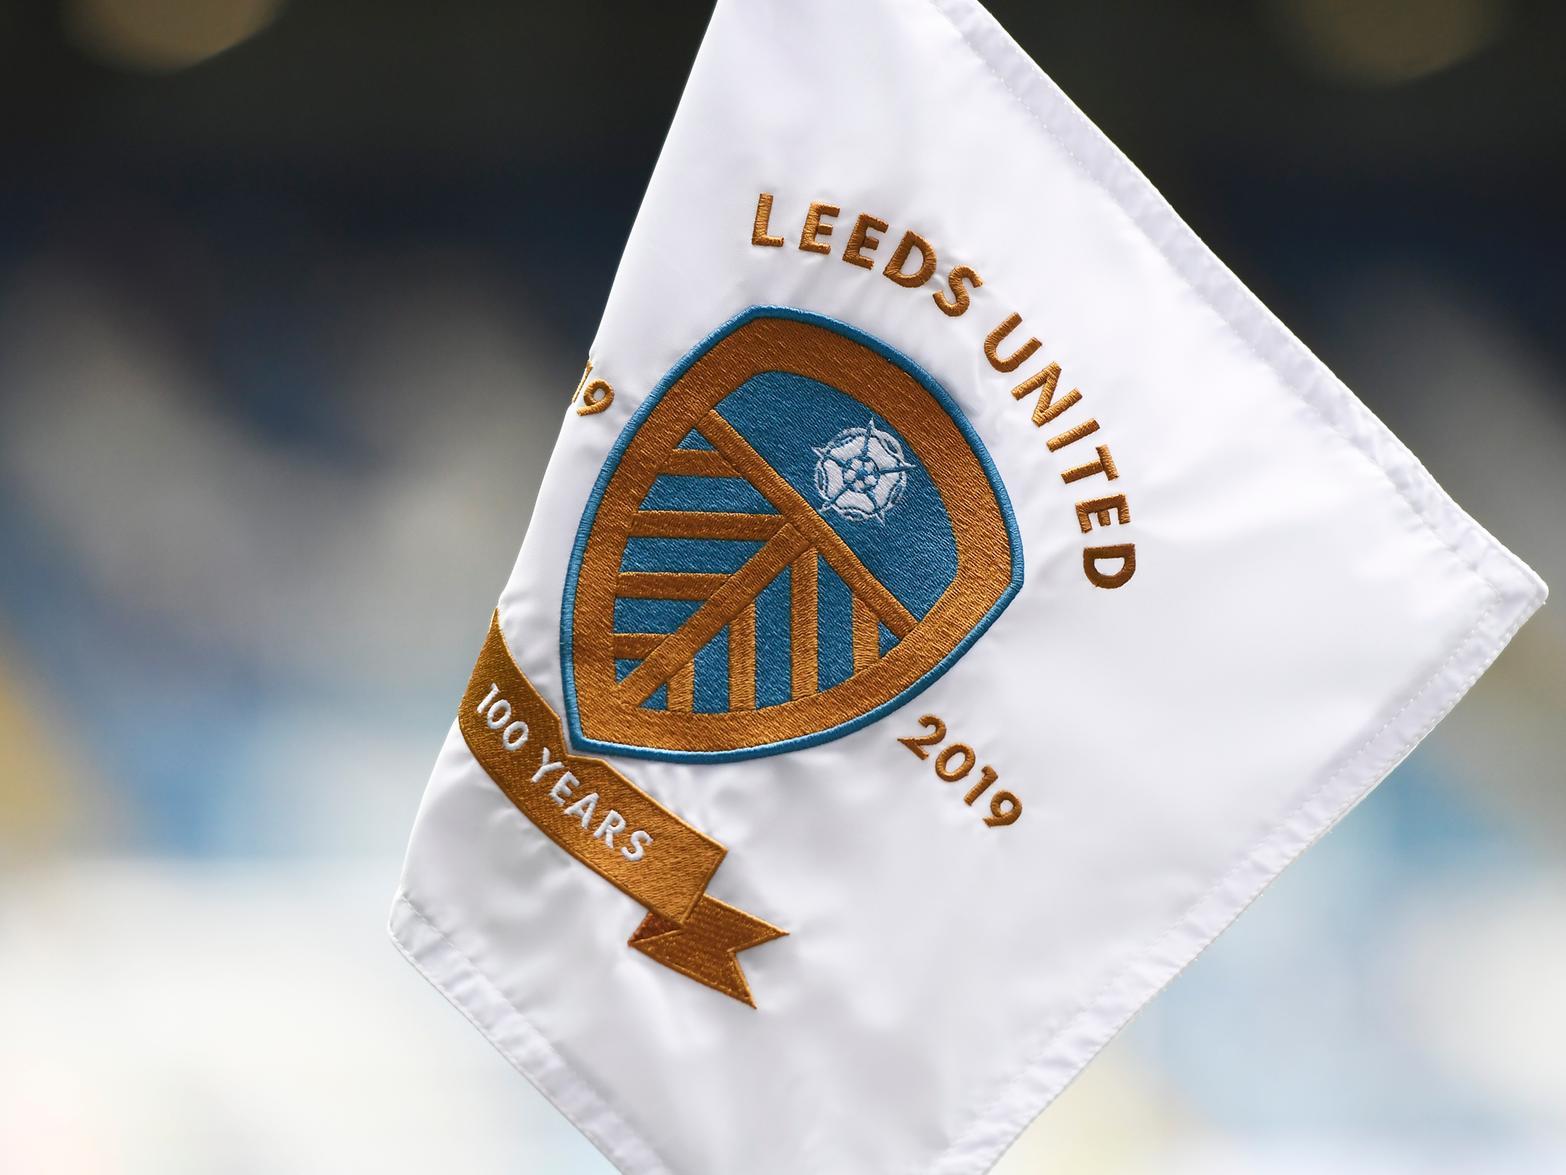 Football pundit Noel Whelan has claimed that Leeds could sign as many as three players next month, with a defender, striker and goalkeeper all apparently being targeted. (Football Insider)